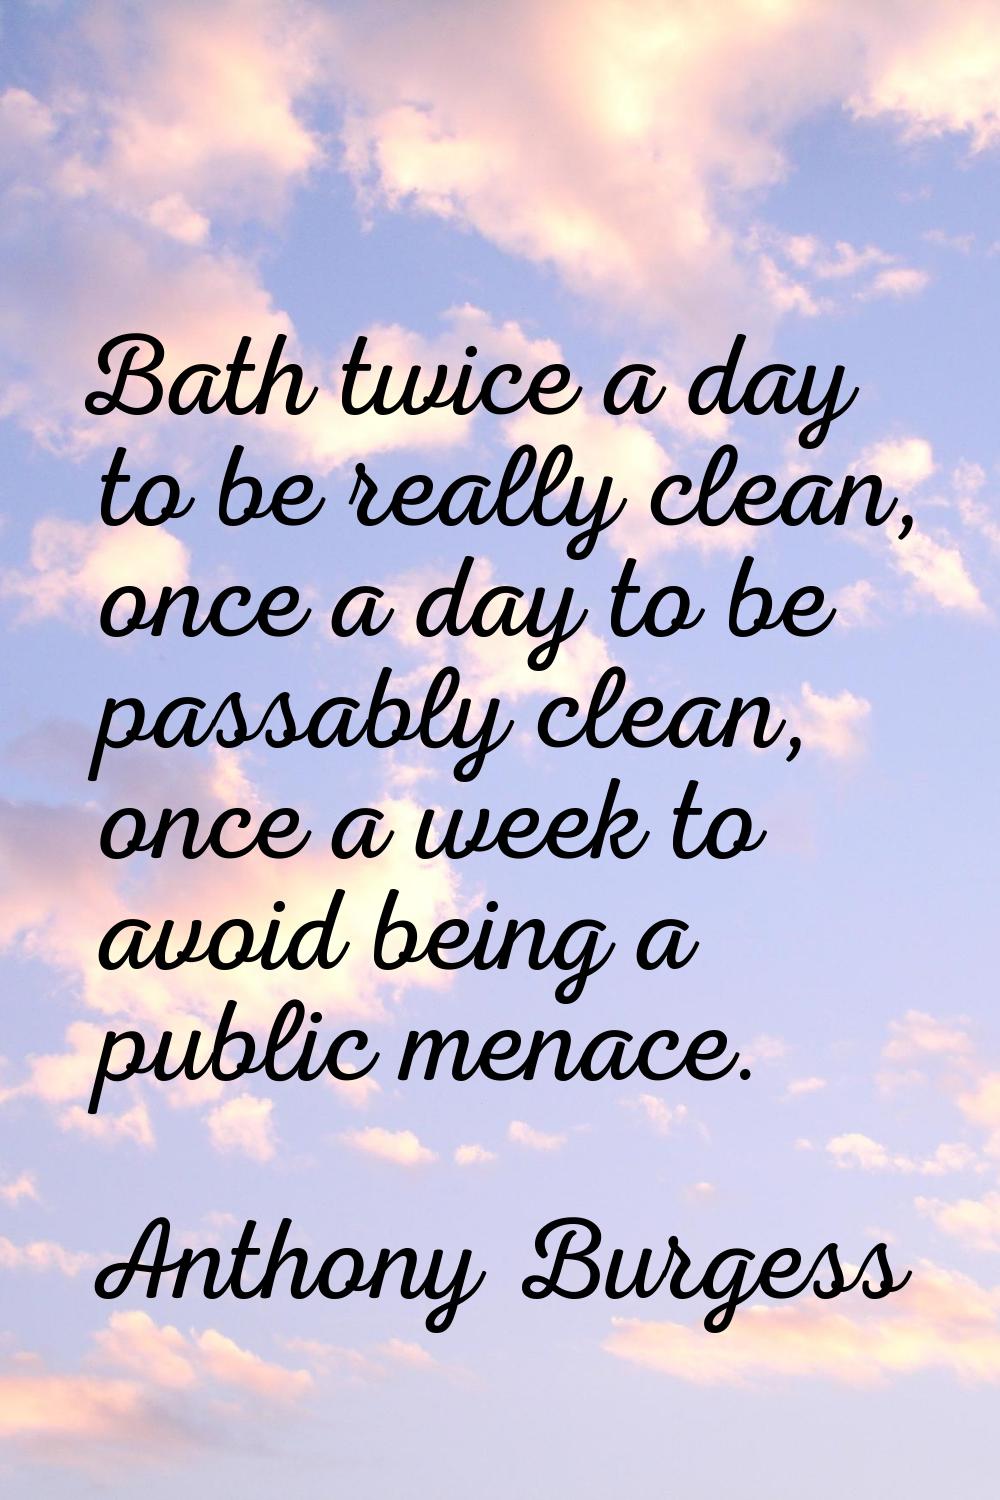 Bath twice a day to be really clean, once a day to be passably clean, once a week to avoid being a 